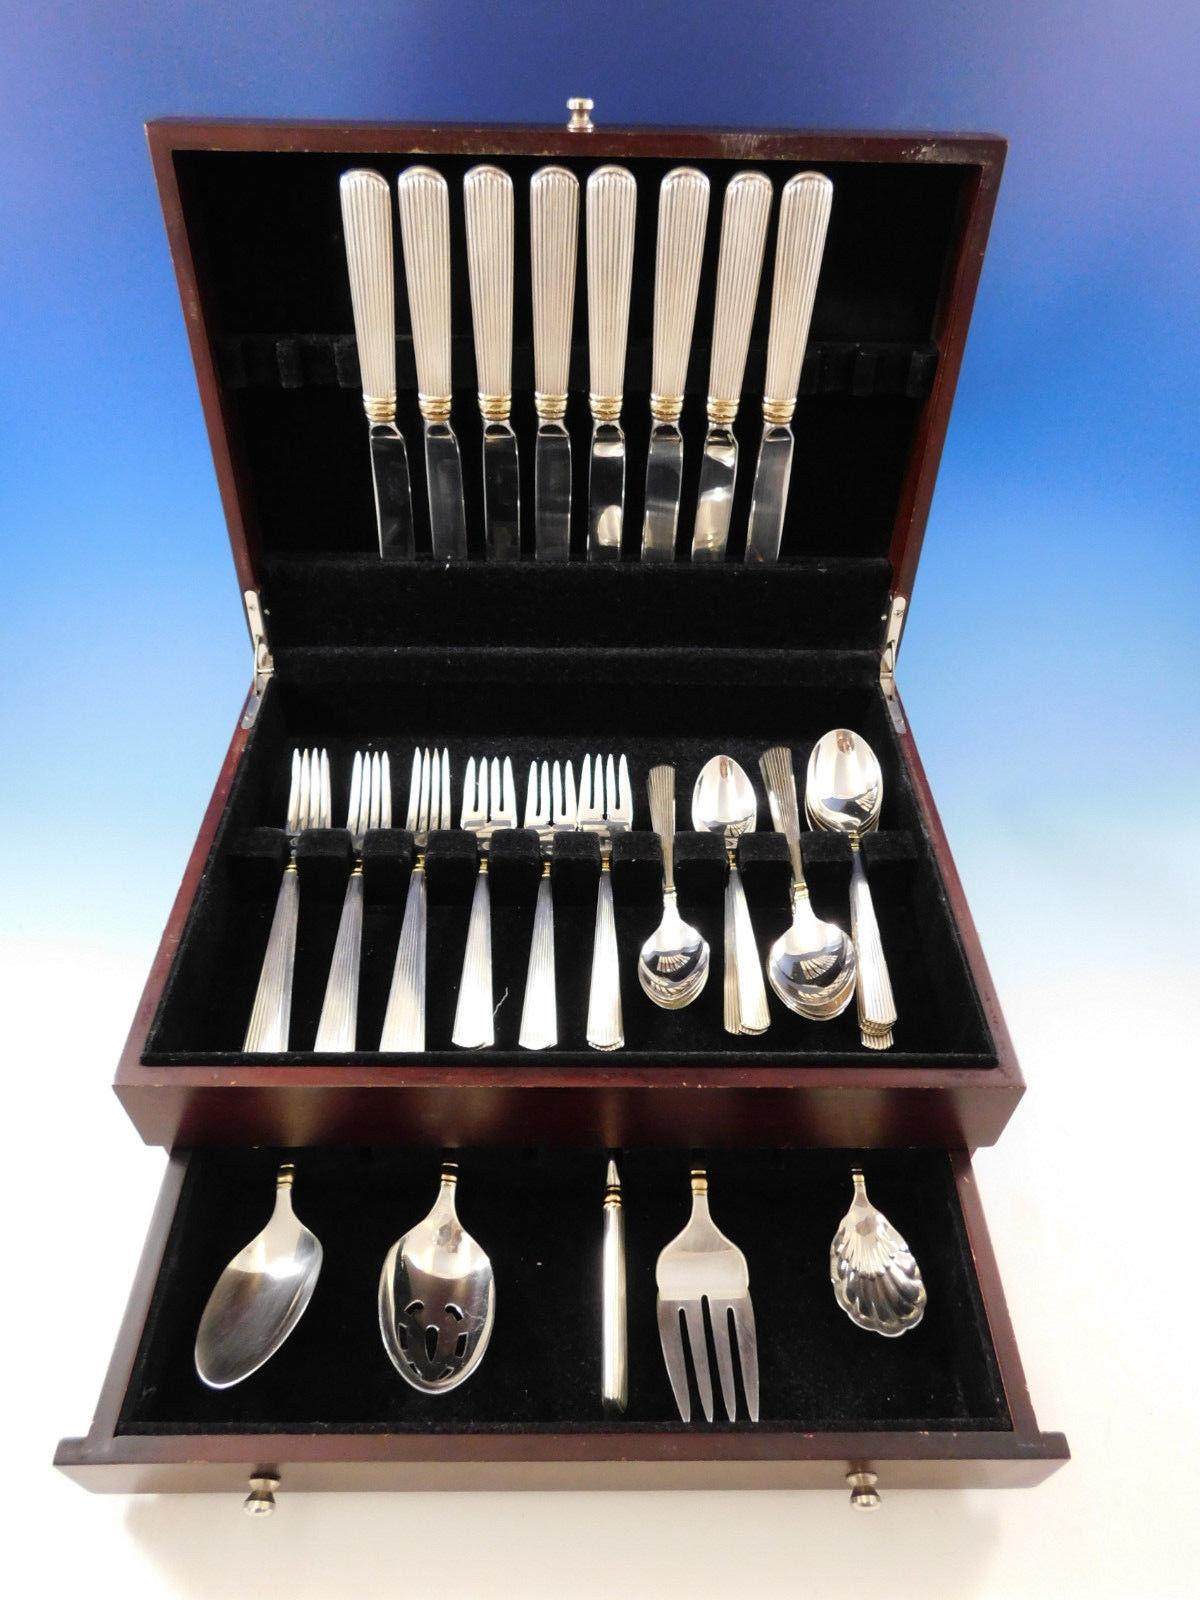 Dinner size golden ashmont (Gold accent) by Reed & Barton sterling silver Flatware set, 45 pieces. This set includes:

8 dinner size knives, 9 7/8